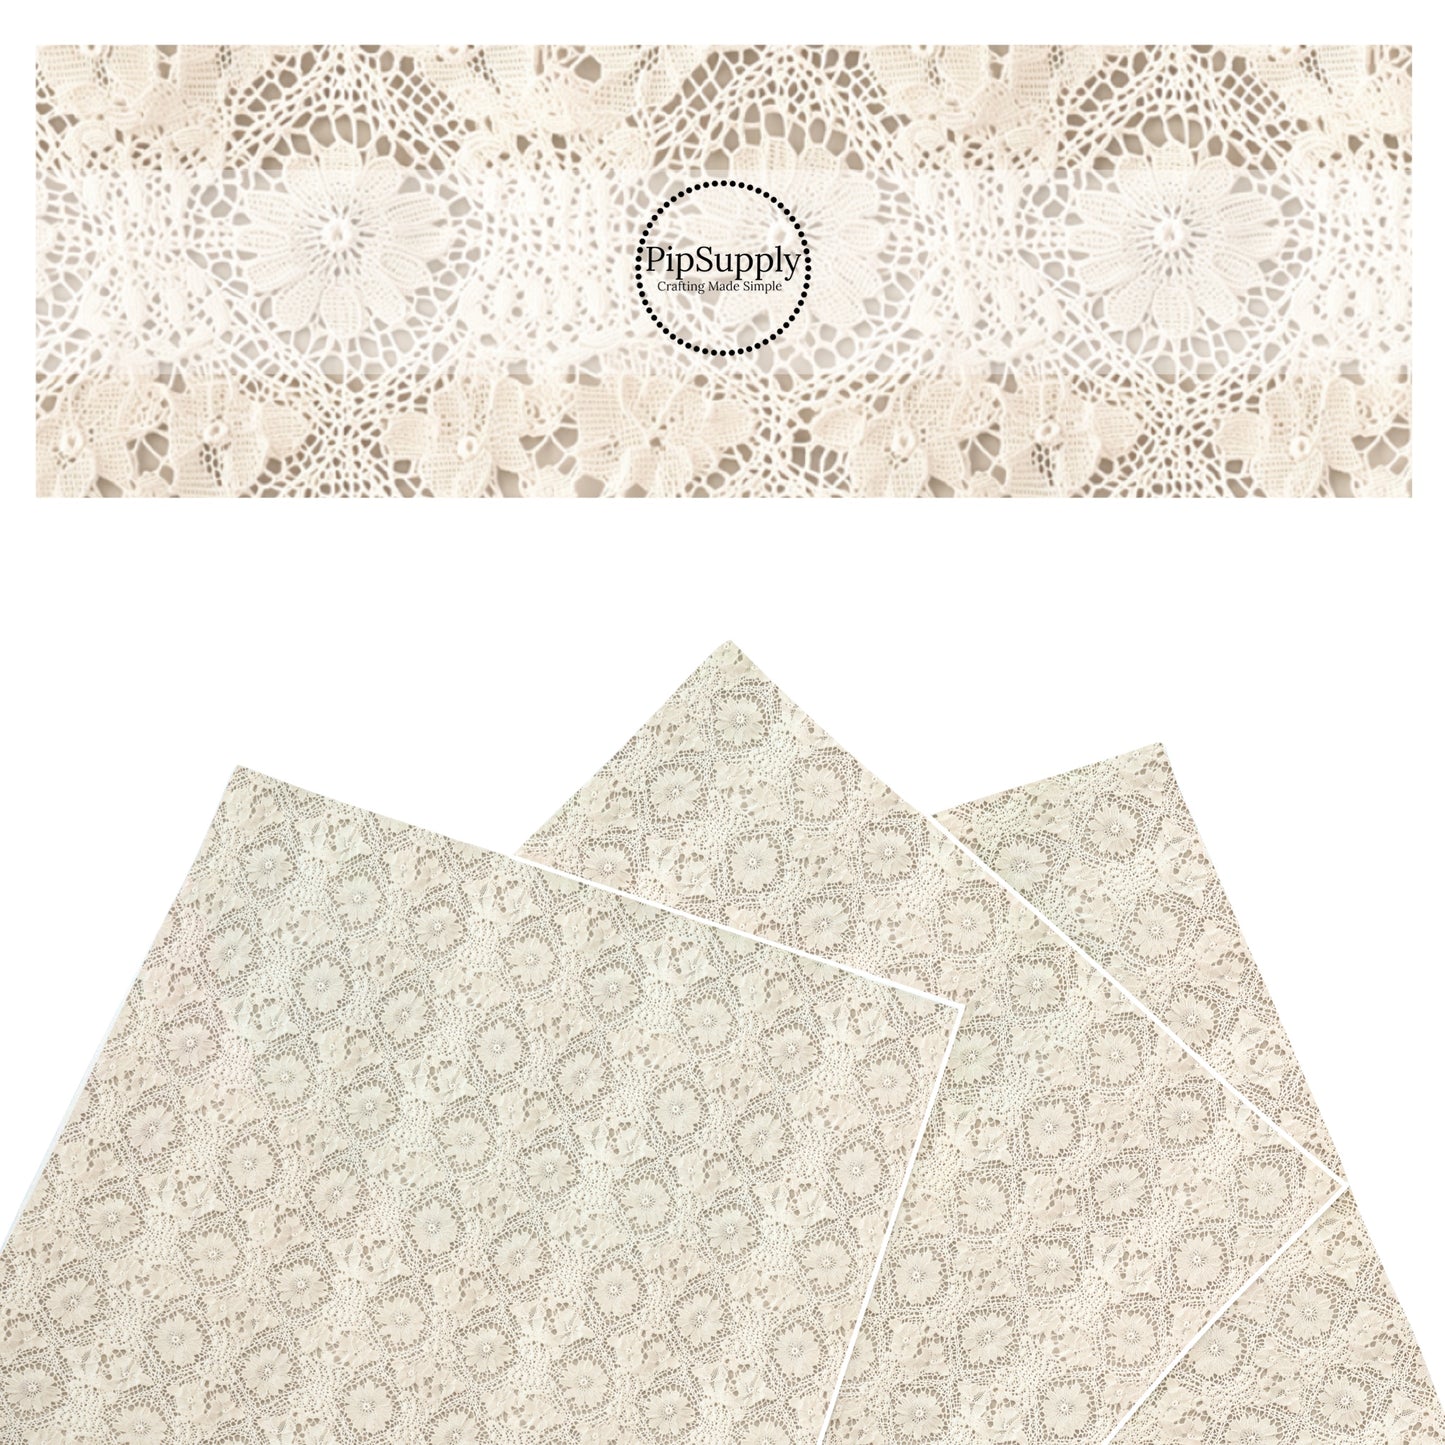 These cream lace pattern faux leather sheets contain the following design elements: doily lace. Our CPSIA compliant faux leather sheets or rolls can be used for all types of crafting projects. These patterns are not embroidered. It is just the design to give it the embroidered look.